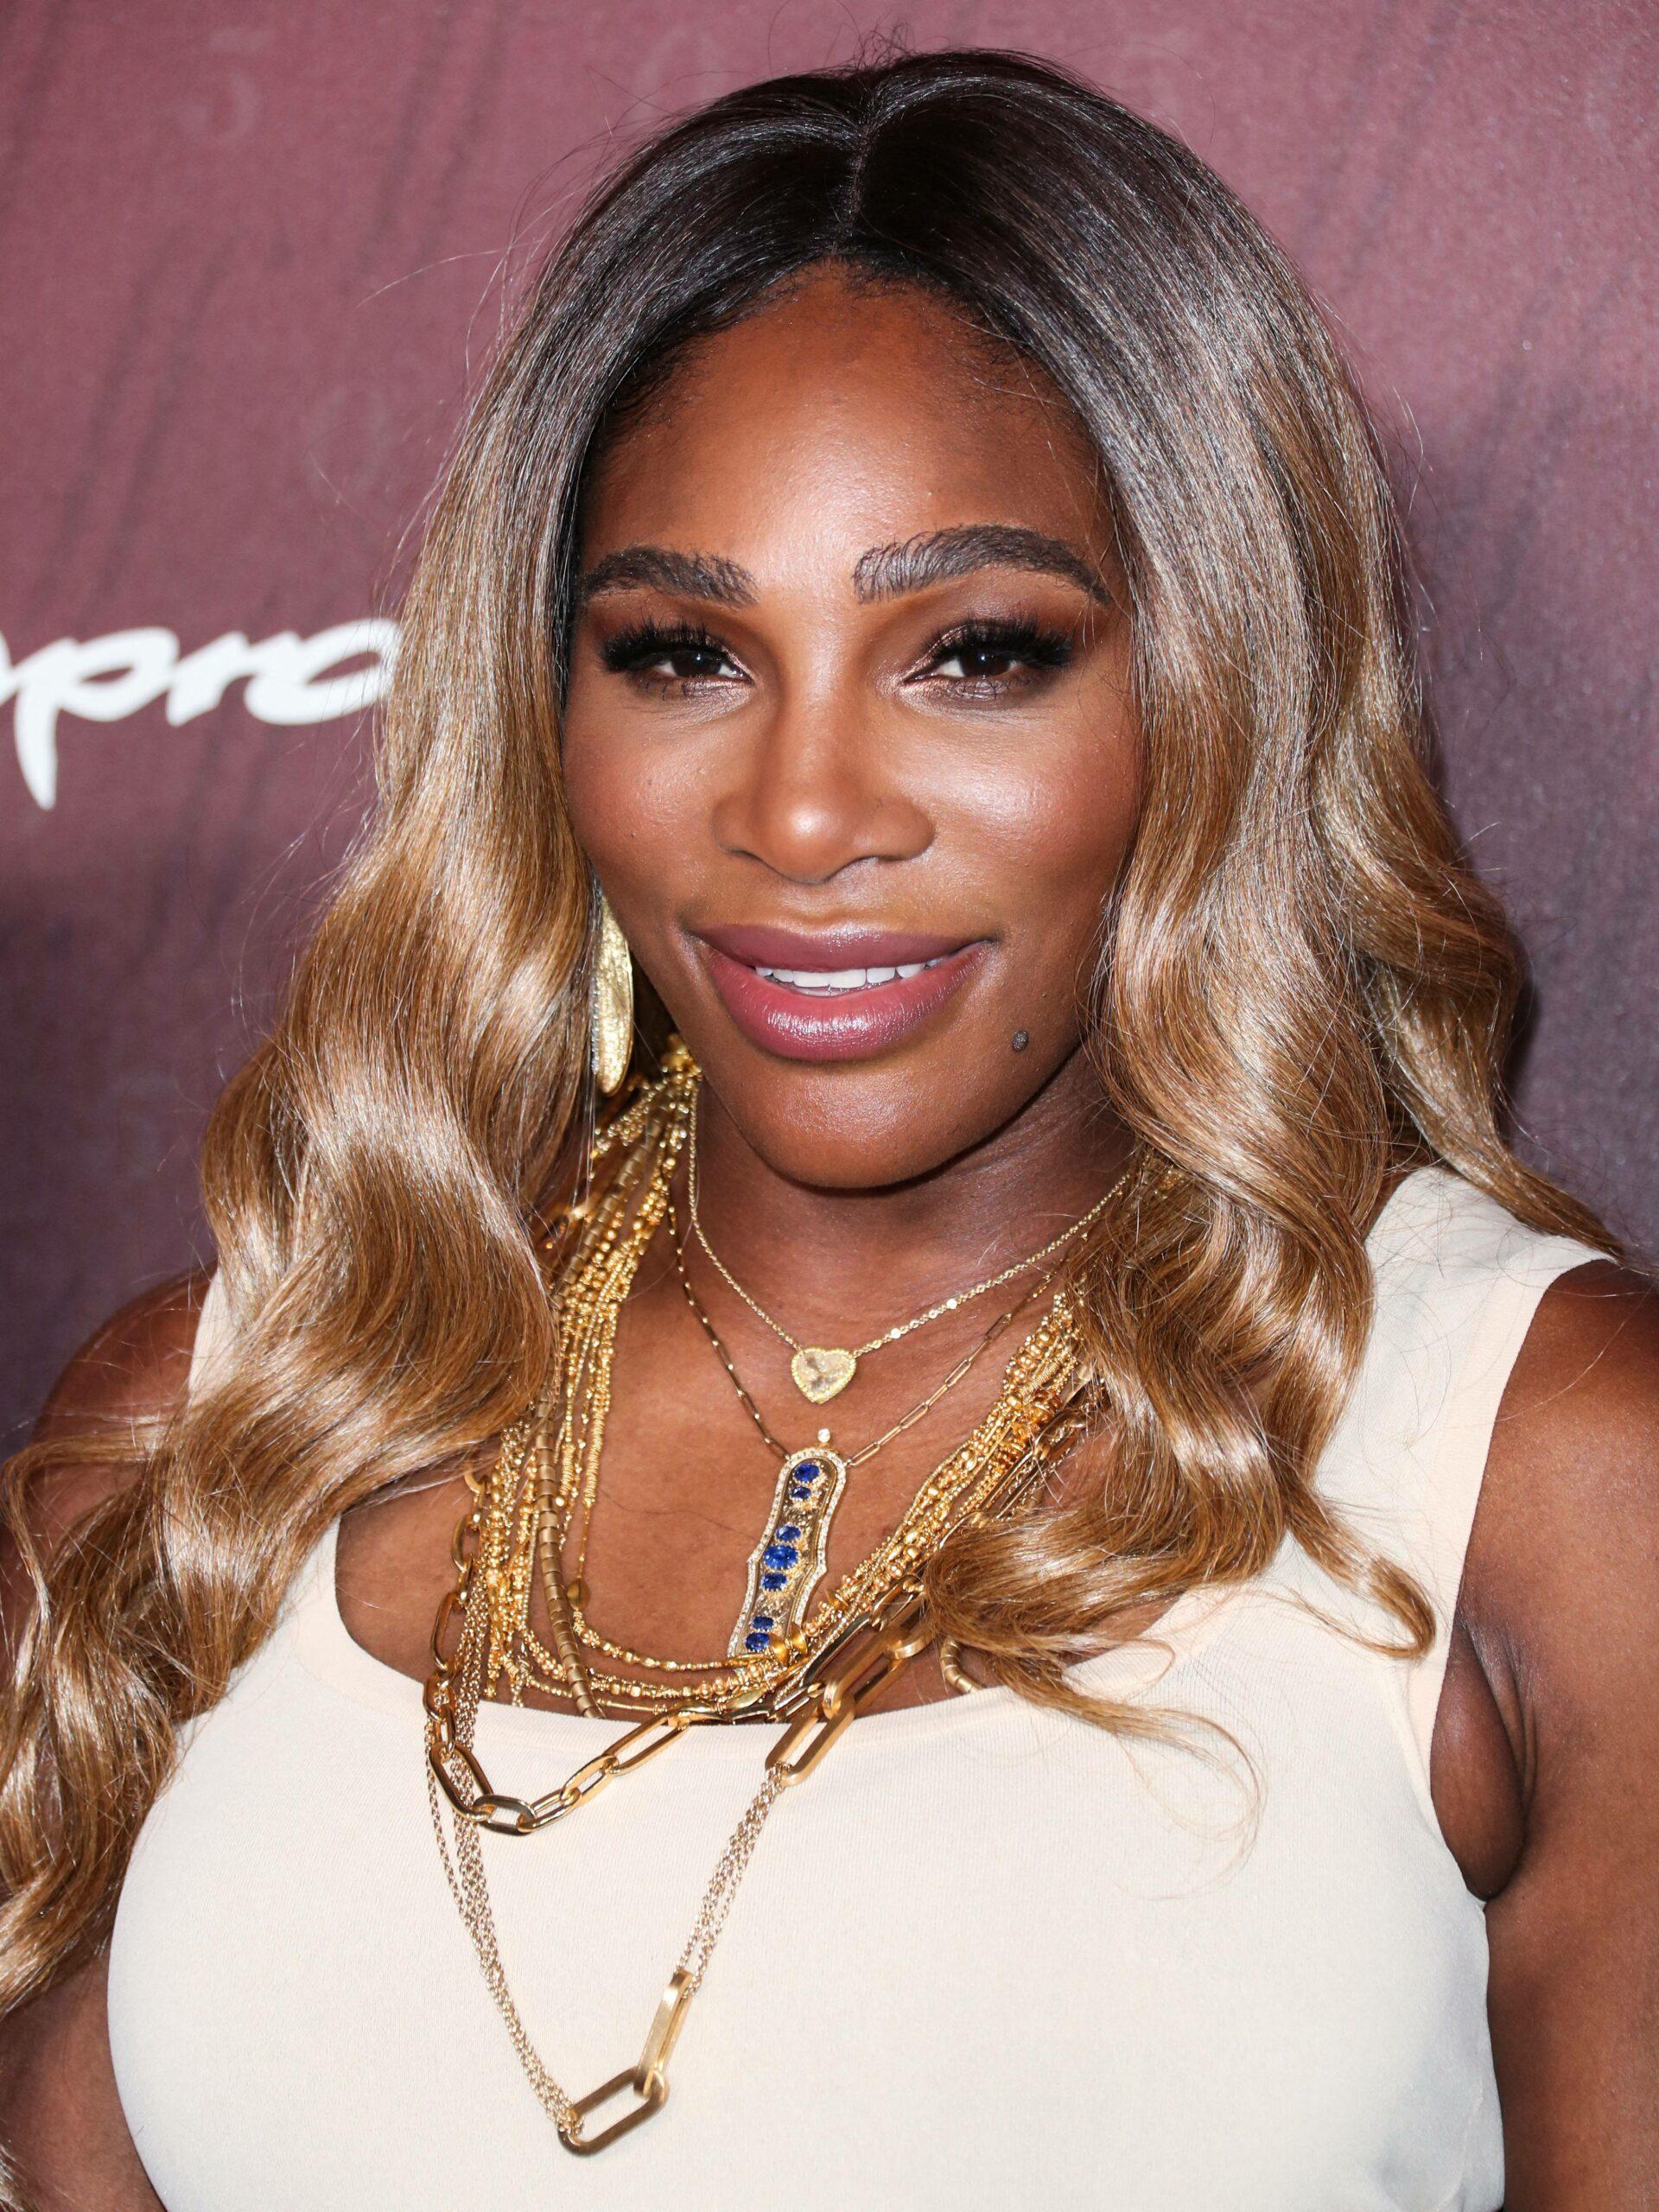 Serena Williams arrives at the Sports Illustrated Fashionable 50 held at Sunset Room Hollywood on July 18, 2019